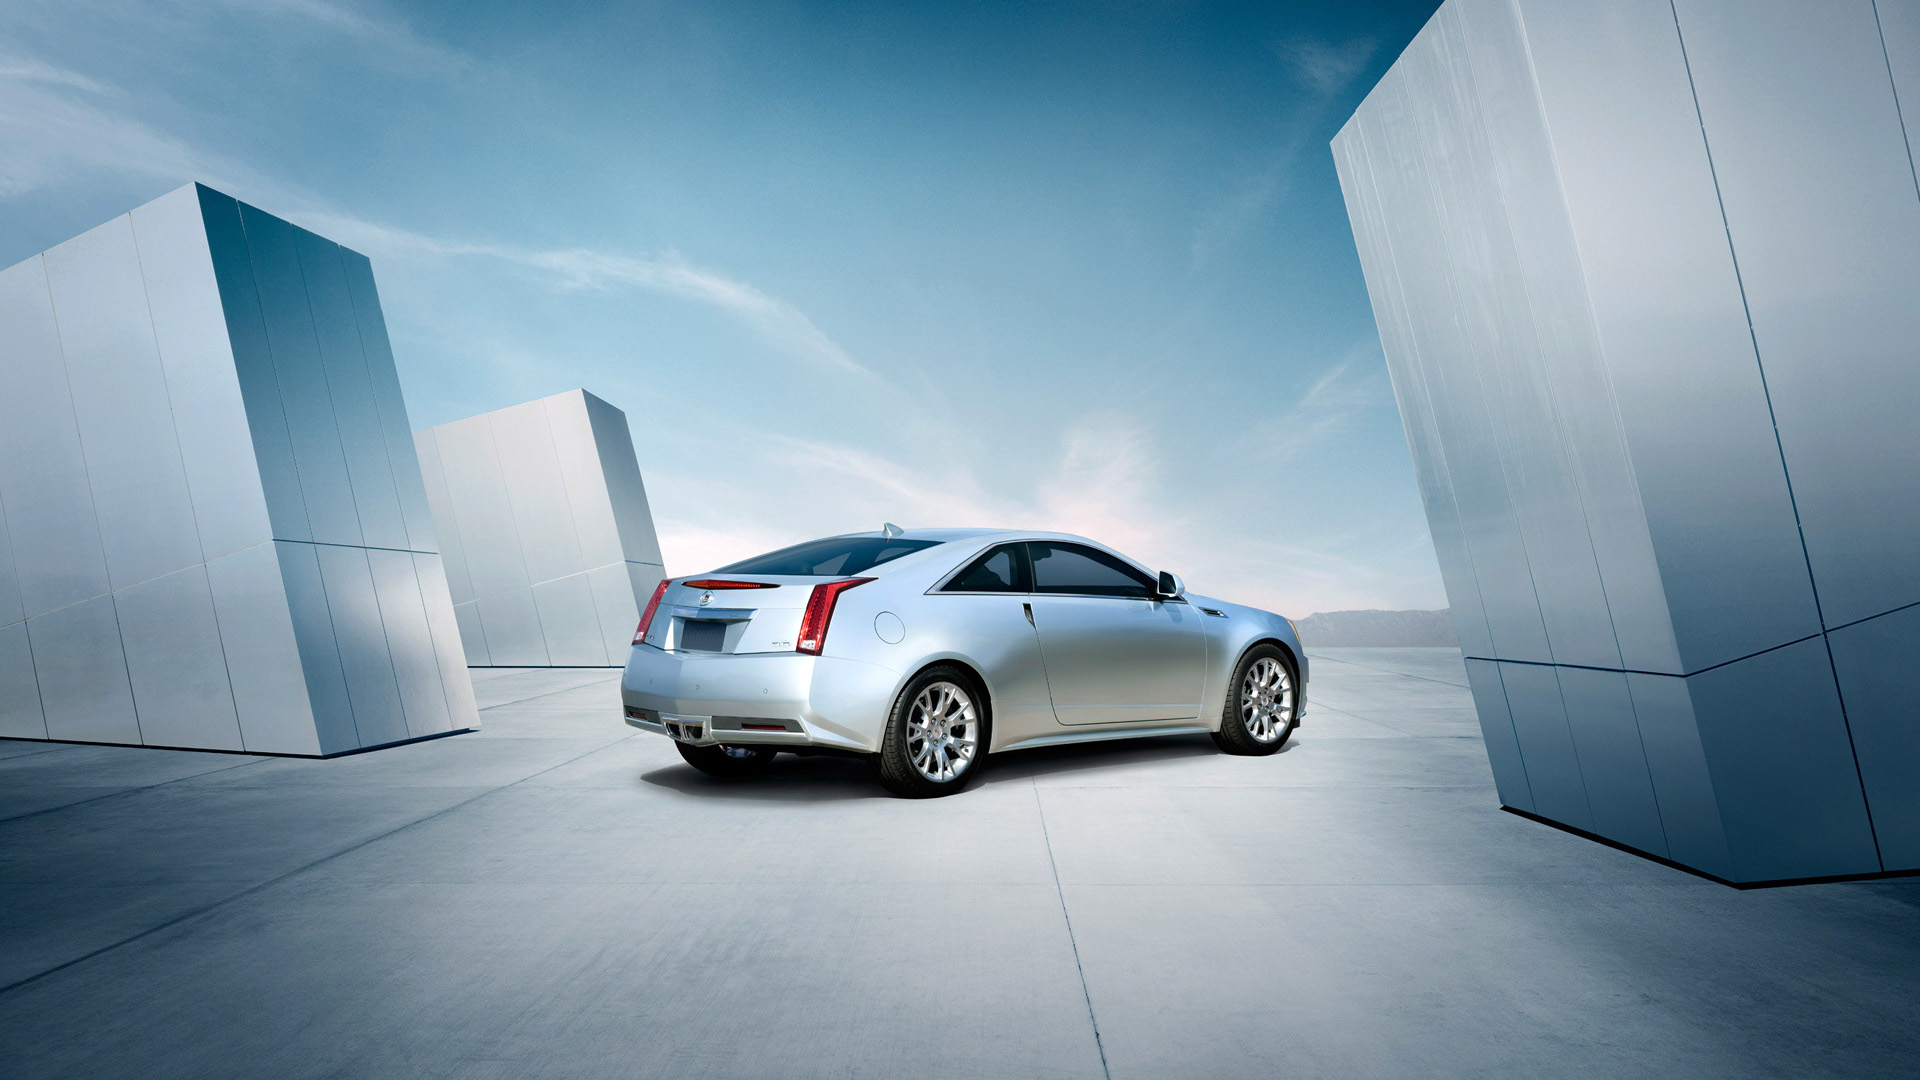  2011 Cadillac CTS Coupe Wallpaper.